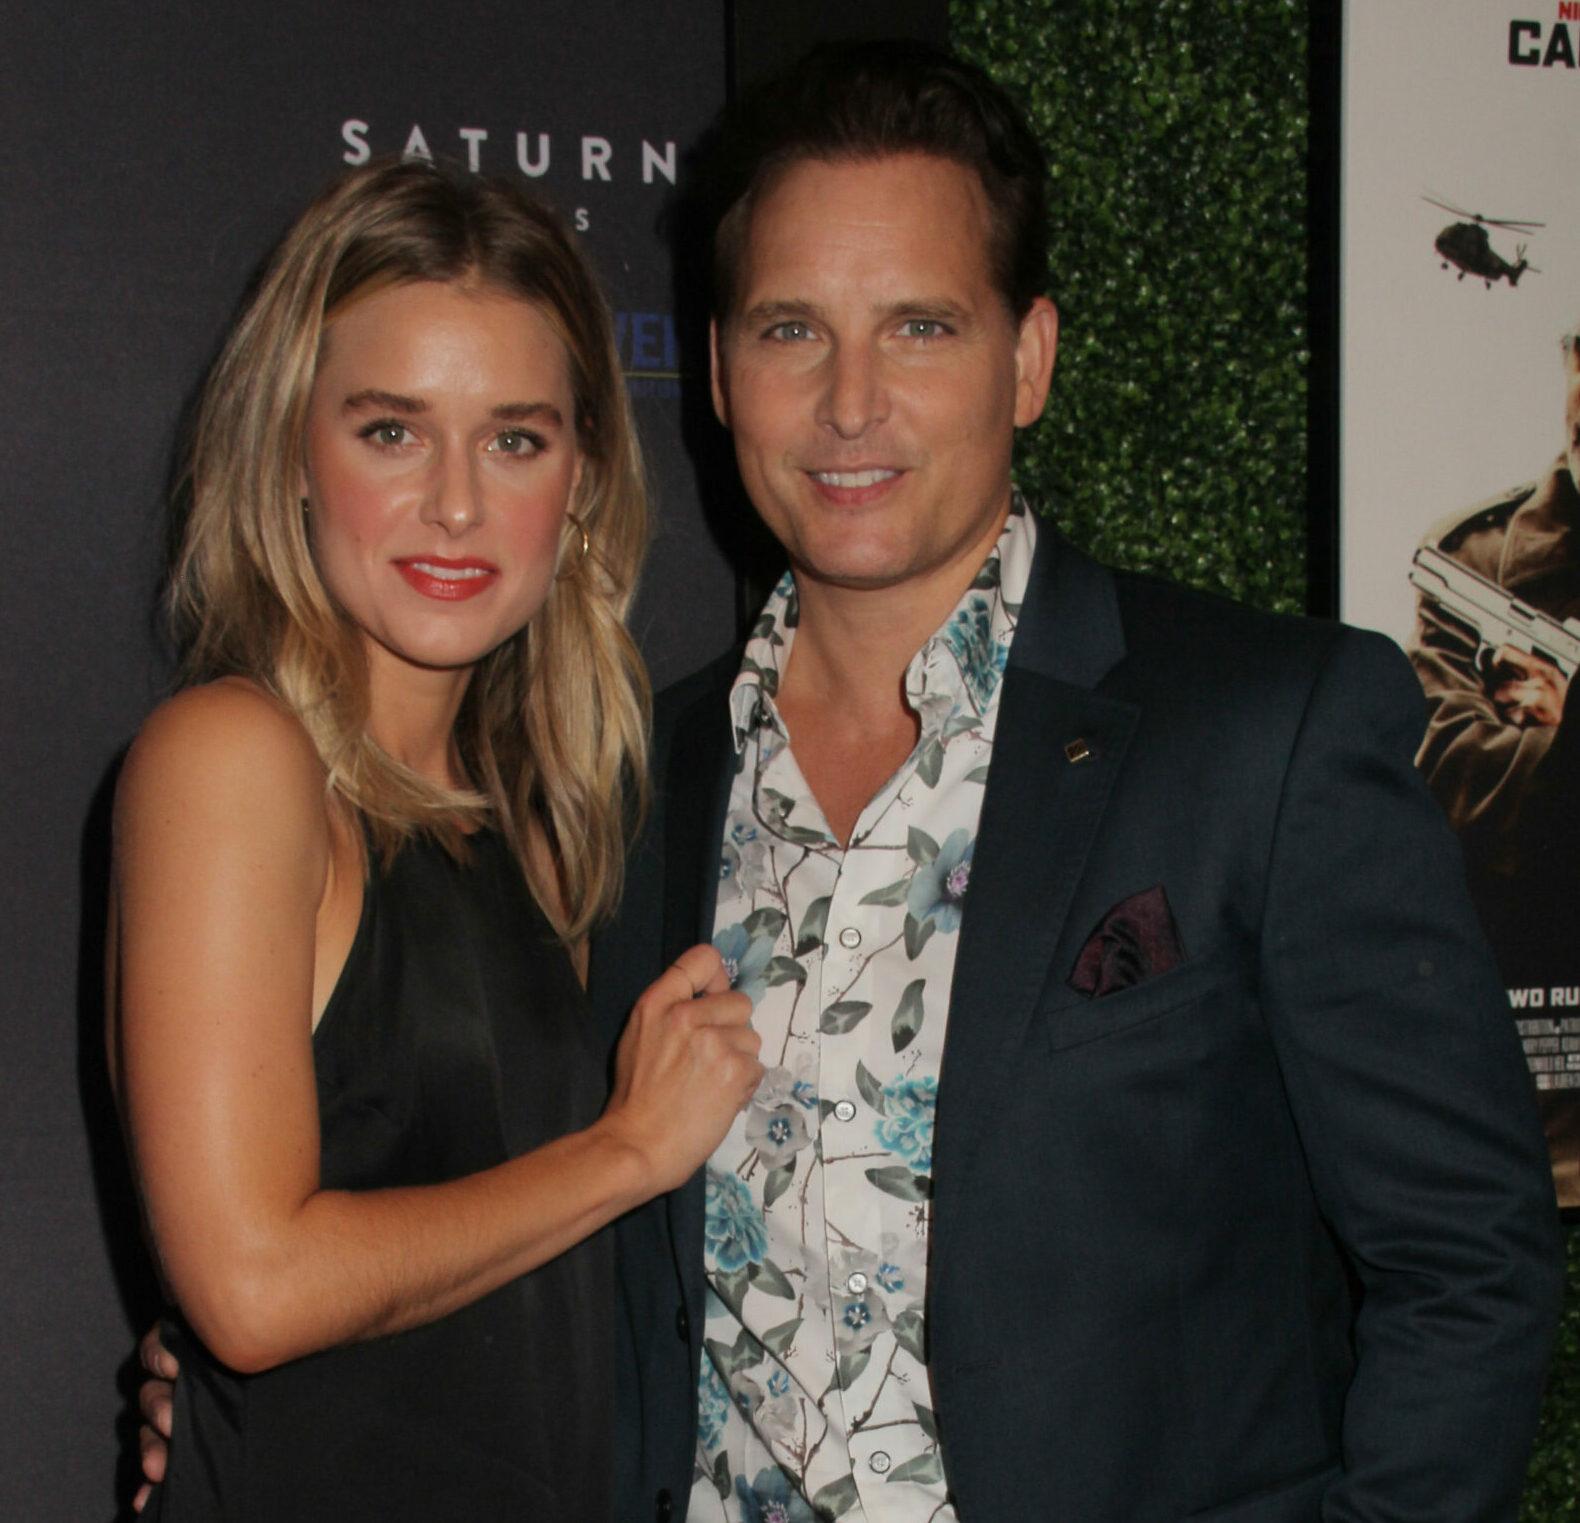 Lily Anne Harrison, Peter Facinelli 09/16/2019 "Running with the Devil" premiere held at Writers Guild Theater in Beverly Hills, CA